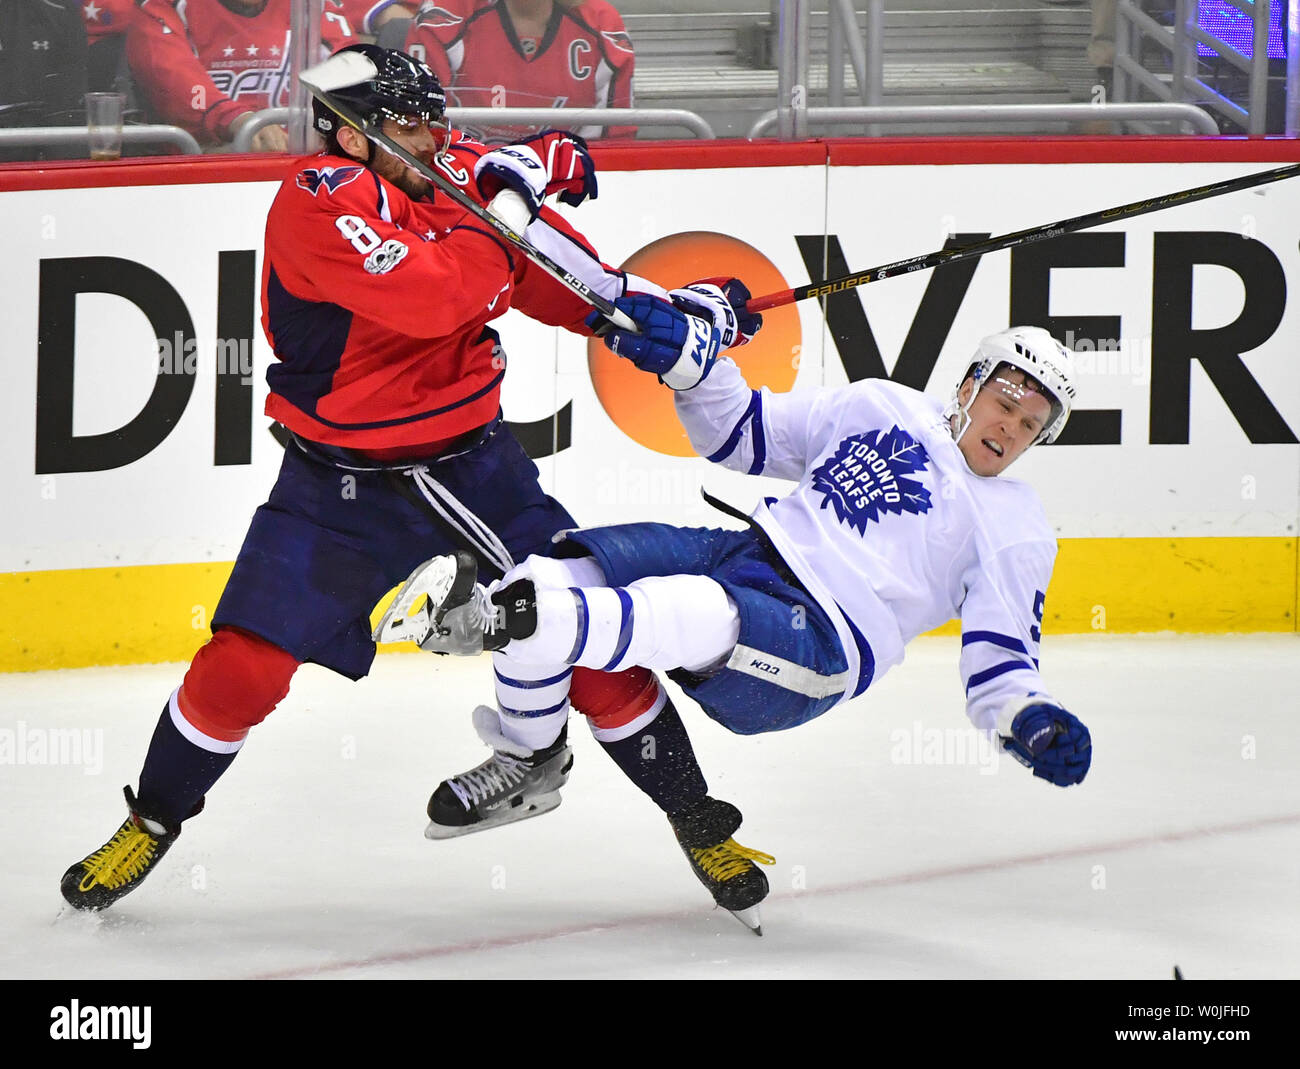 Washington Capitals left wing Alex Ovechkin (8) hits Toronto Maple Leafs  defenseman Jake Gardiner (51) in the first period of game 3 of the Eastern  Conference Quarterfinals at the Verizon Center in